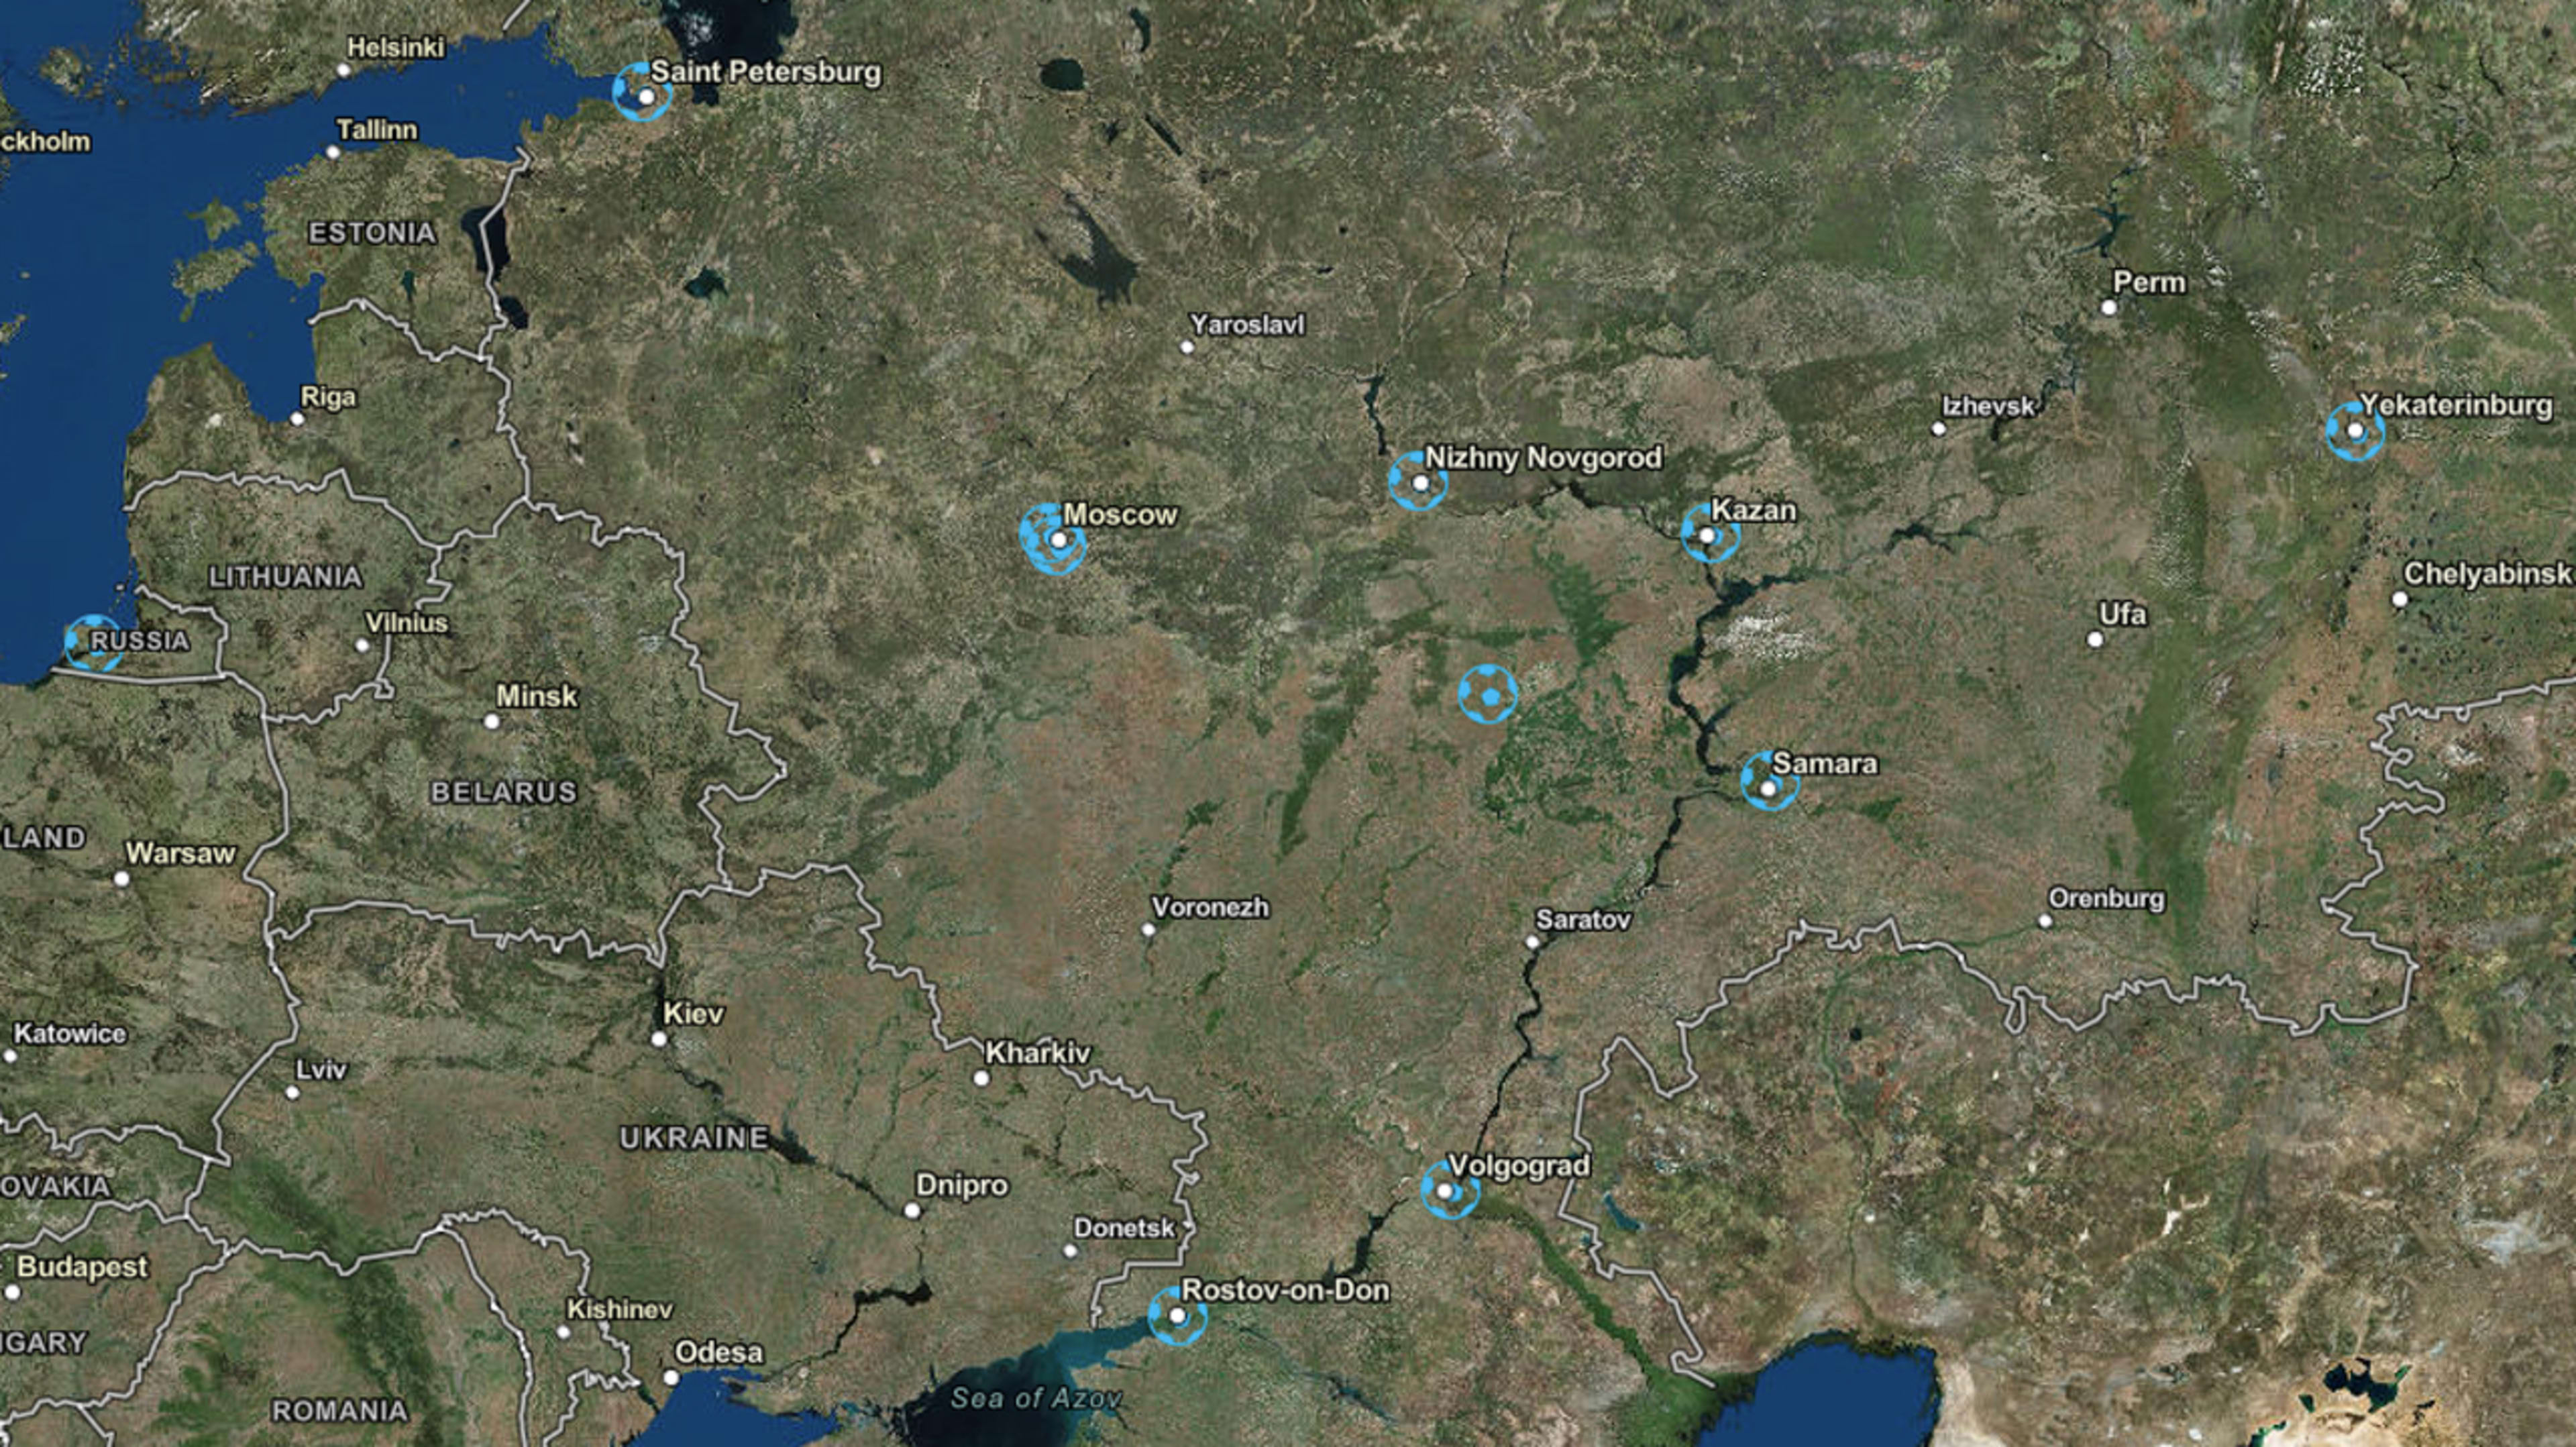 This map of World Cup stadiums shows super hi-res satellite images of all 12 Russian venues